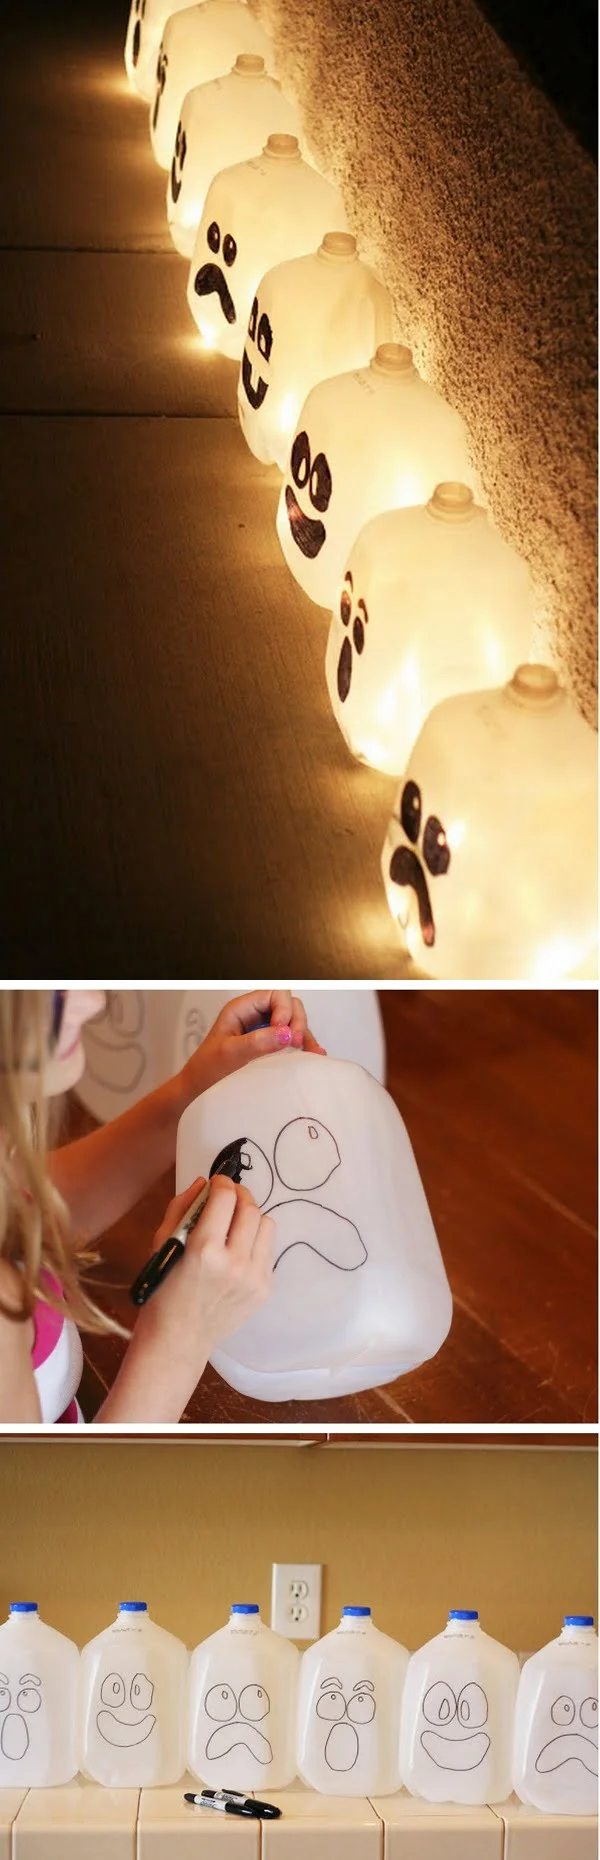 Check out the tutorial on how to make DIY spooky spirit jugs for Halloween home decoration